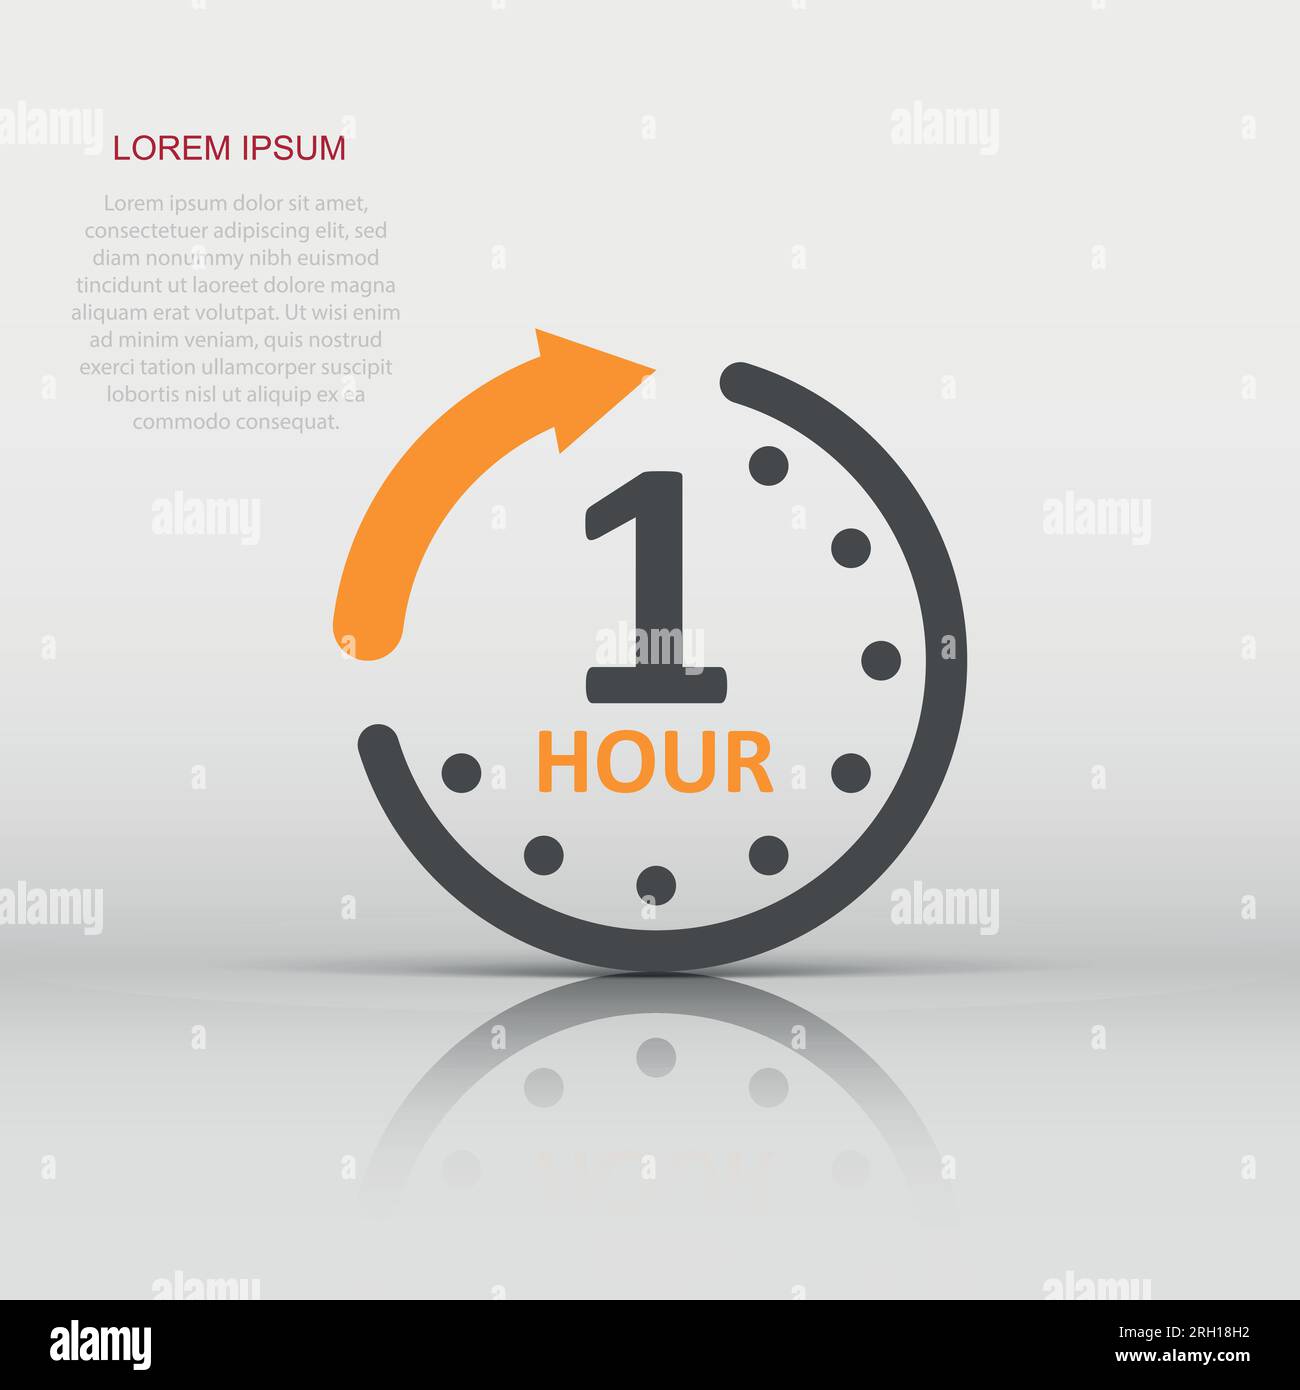 https://c8.alamy.com/comp/2RH18H2/1-hour-clock-icon-in-flat-style-timer-countdown-vector-illustration-on-isolated-background-time-measure-sign-business-concept-2RH18H2.jpg